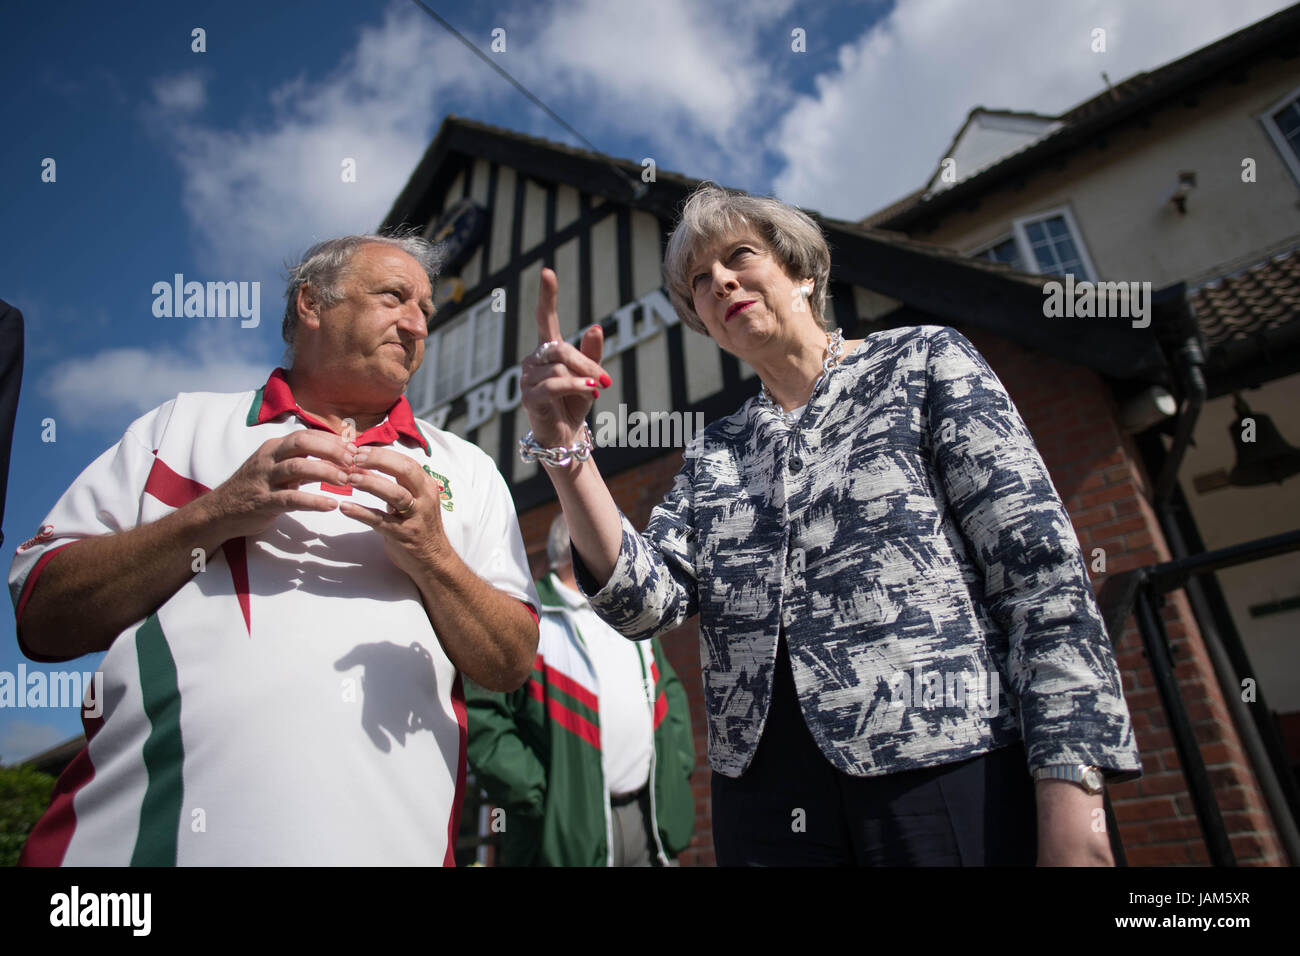 Prime Minister Theresa May visits Atherley Bowling Club in Southampton, while on the General Election campaign trail. Stock Photo